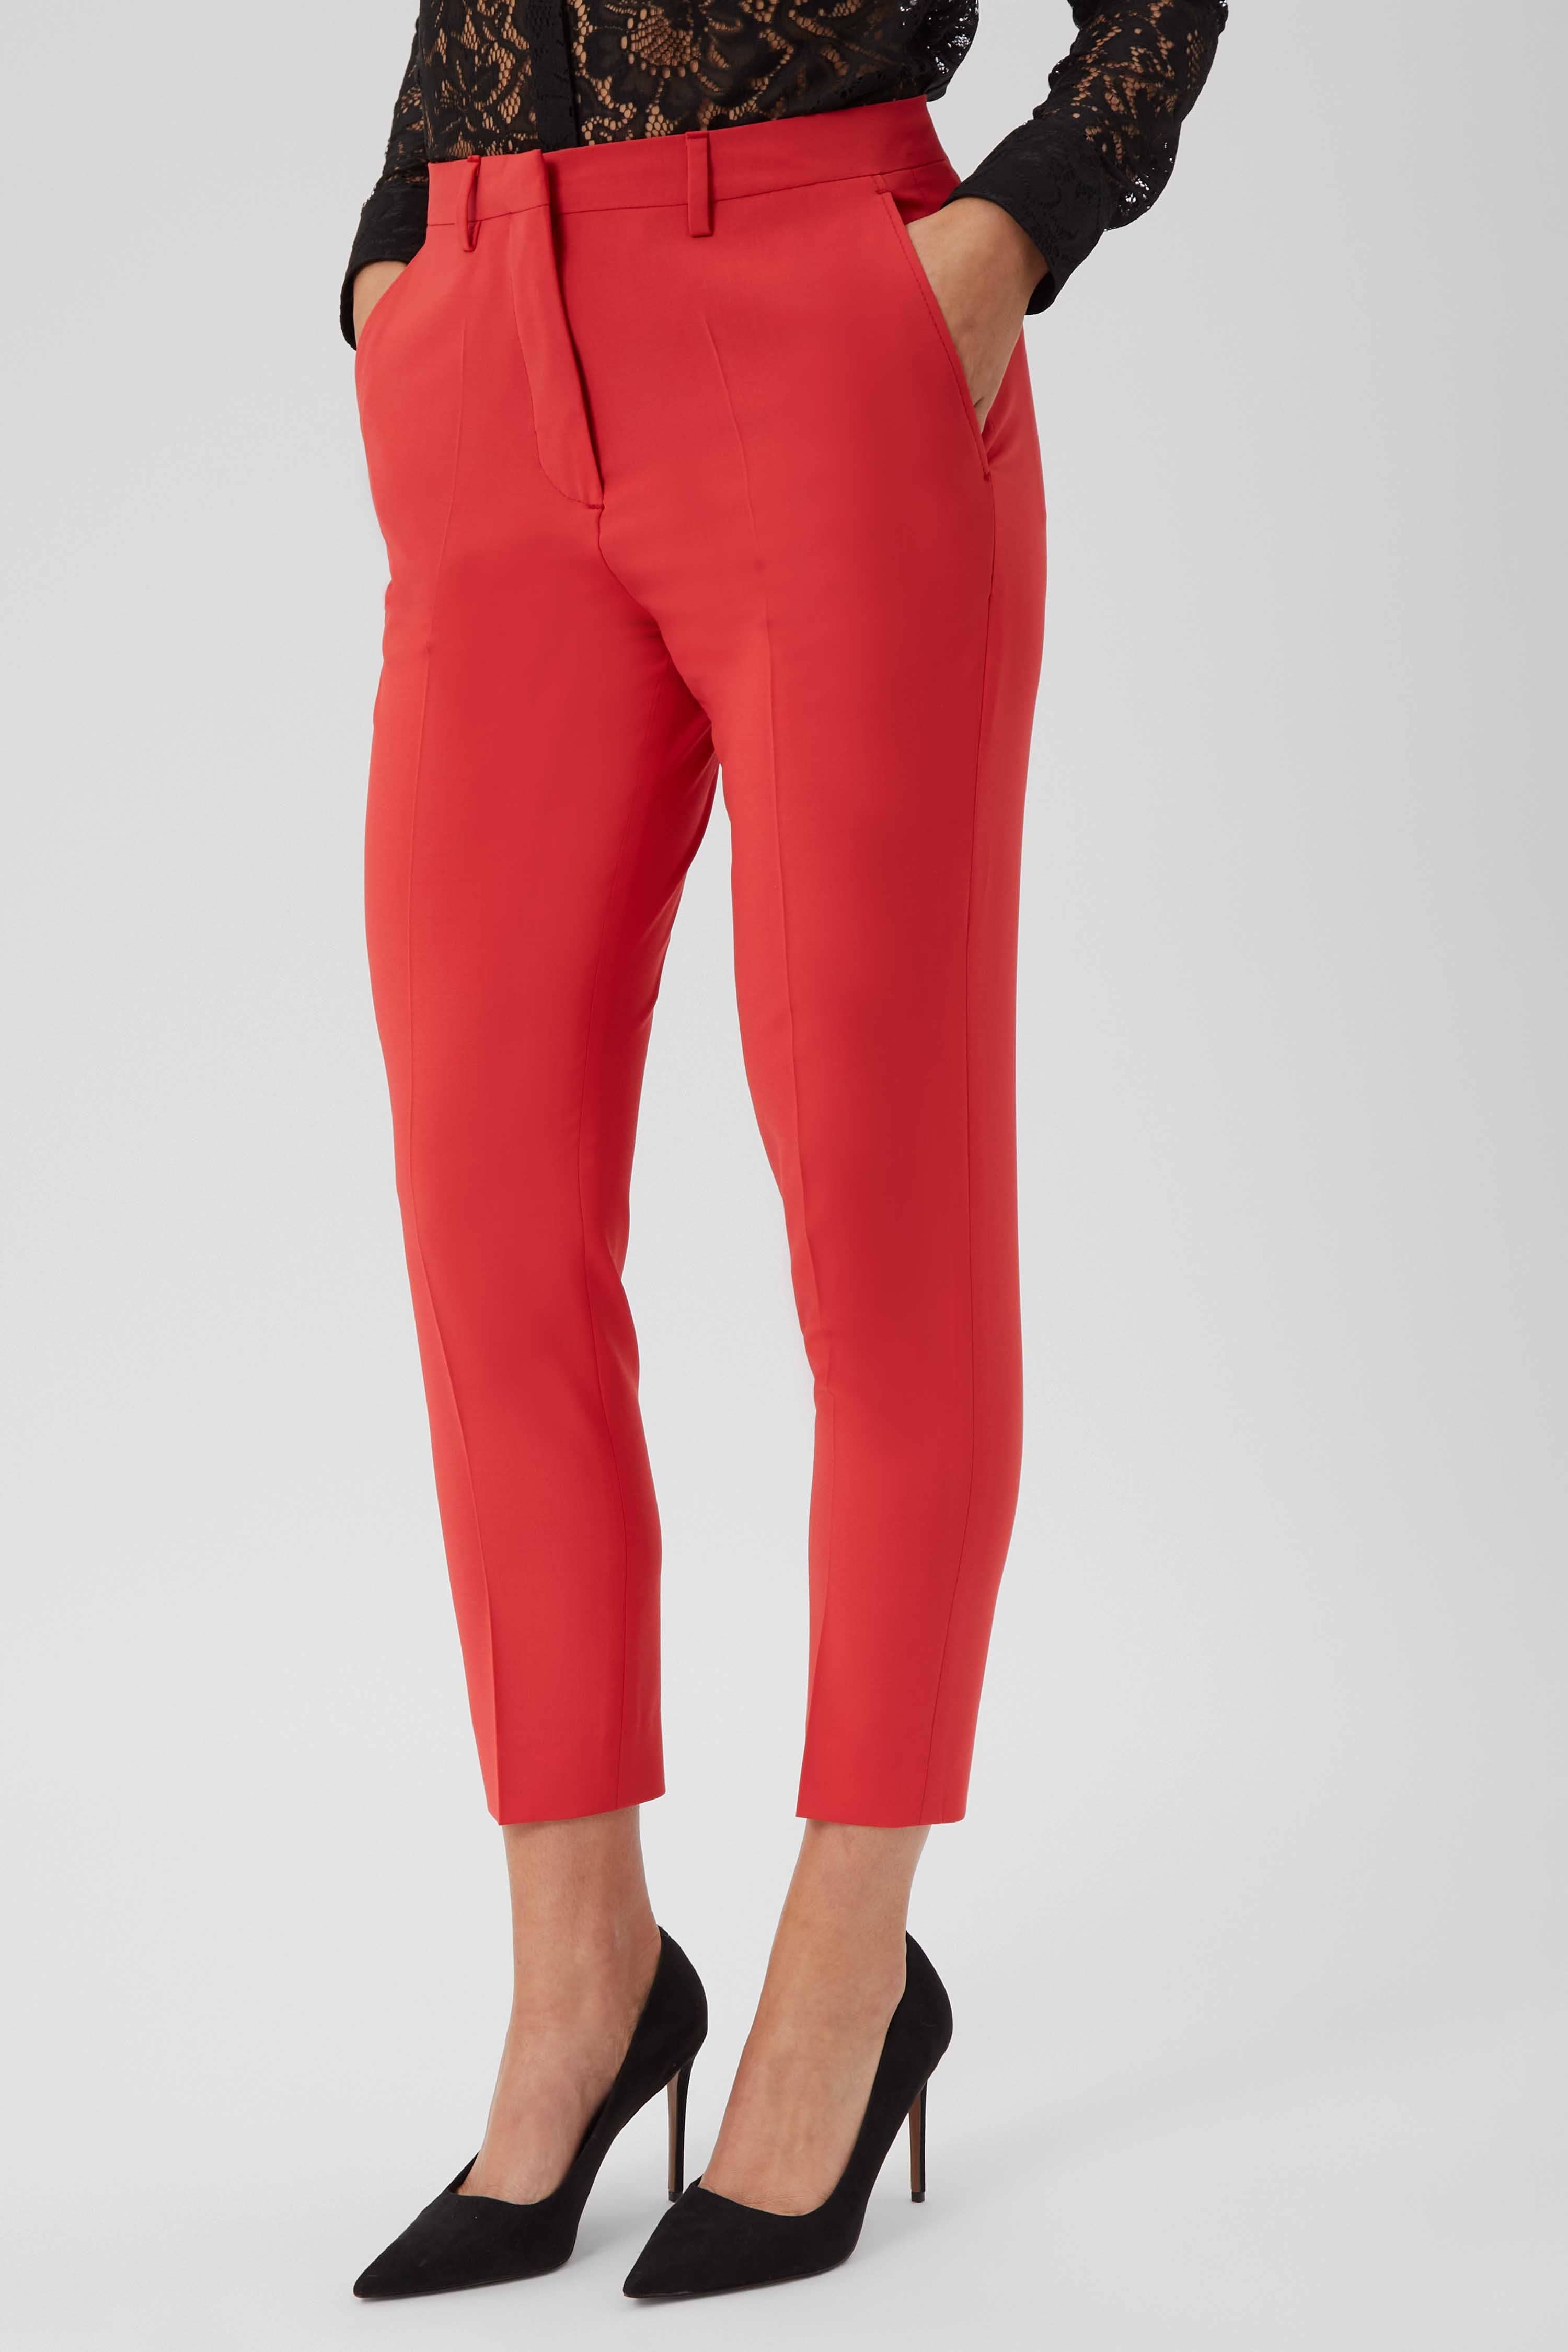 Twisted Tailor Womenswear Gehry Bright Red Suit Trousers